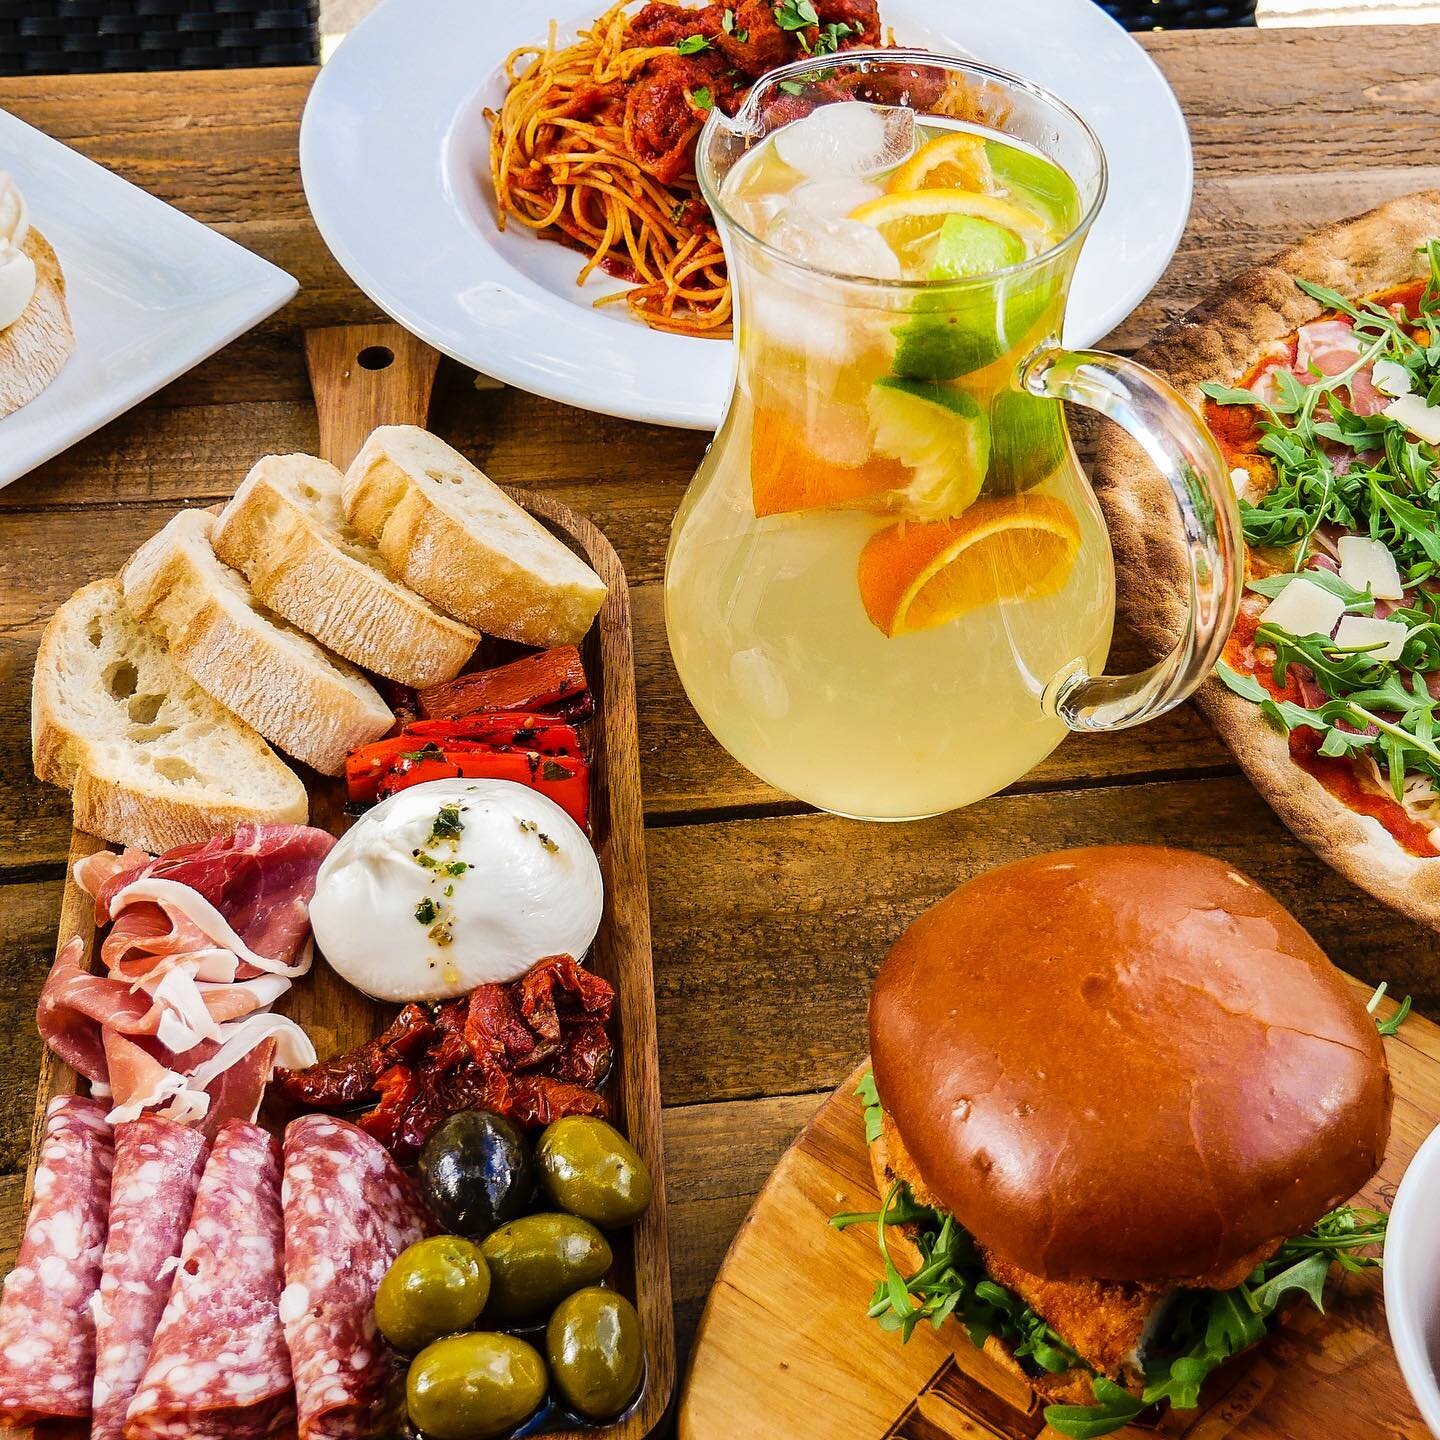 A banquet perfect for this heatwave weather 🌞 
.
.
.
.

Whats better than an Aperol Spritz? 2 LITRES OF APEROL SPRITZ - yes thats right, you can get a 2L glass of Aperol spritz and a pizza or deli platter to share with our Brunch Bonanza offer! Grab